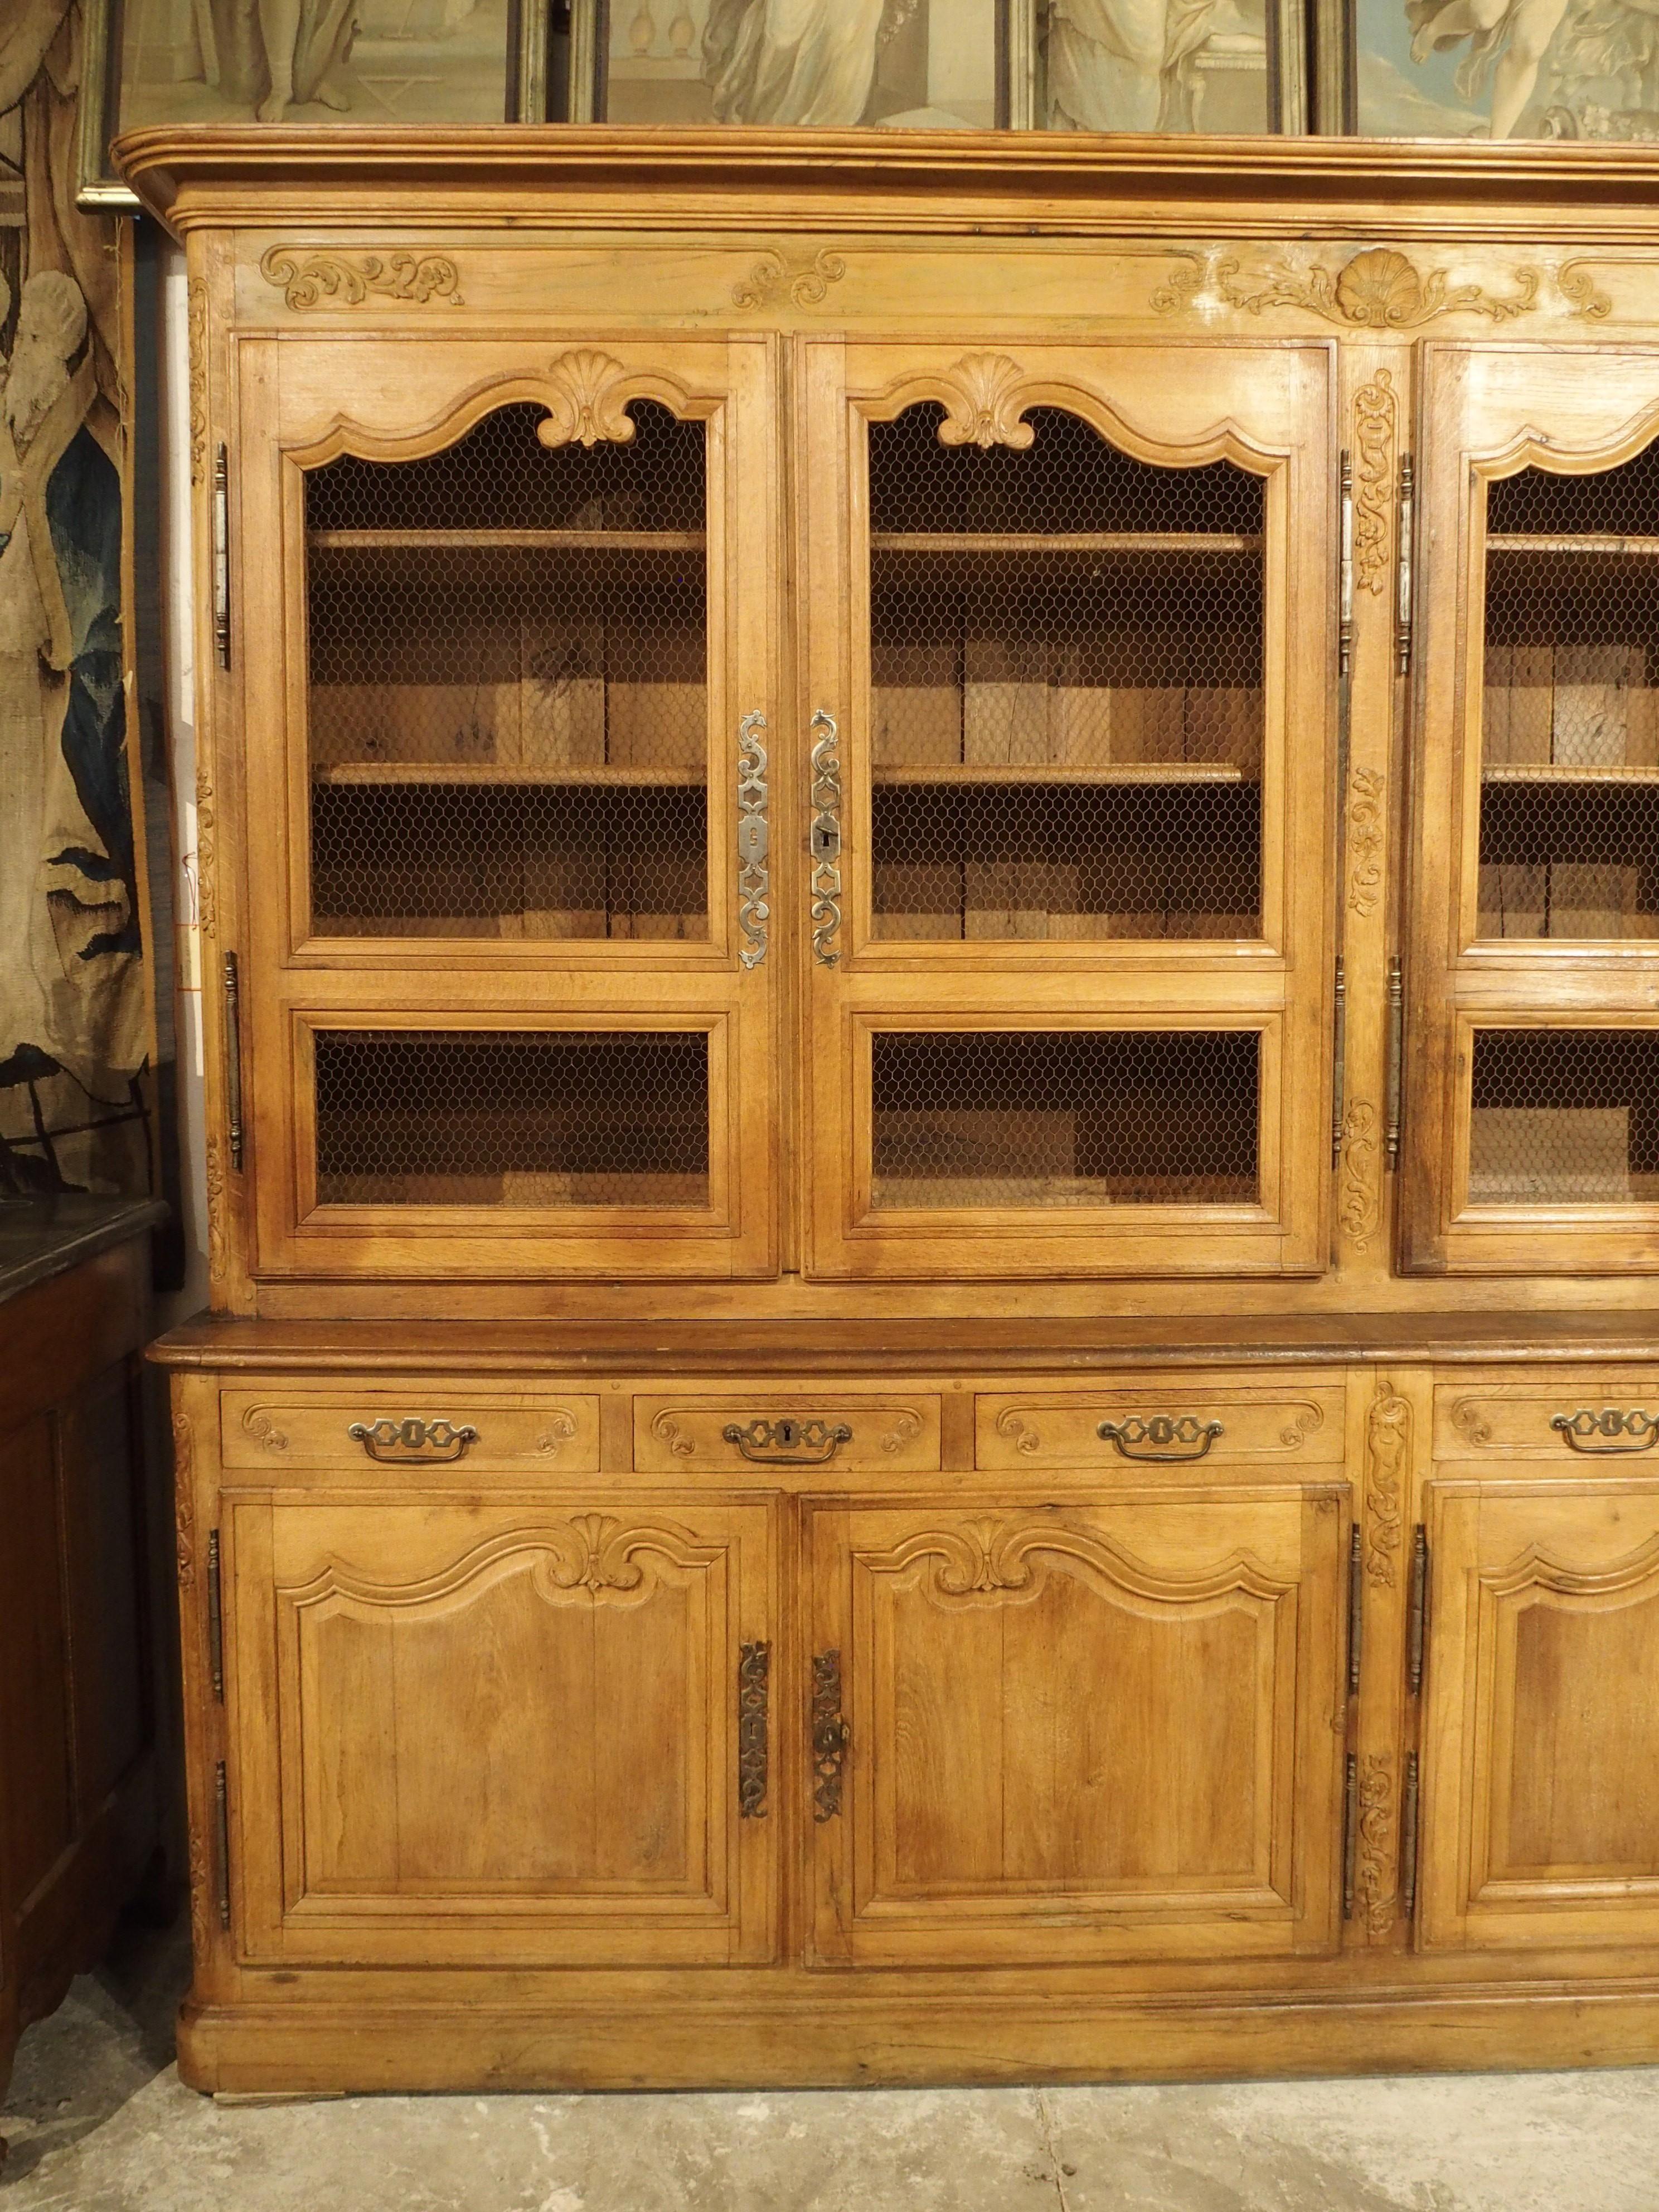 An unusual double bibliothèque from southwest France, this impressive bookcase was hand-carved from oak, circa 1800. Several layers of molding adorn the crown, including a deep cavetto cornice above a wonderfully carved frieze with a scalloped shell